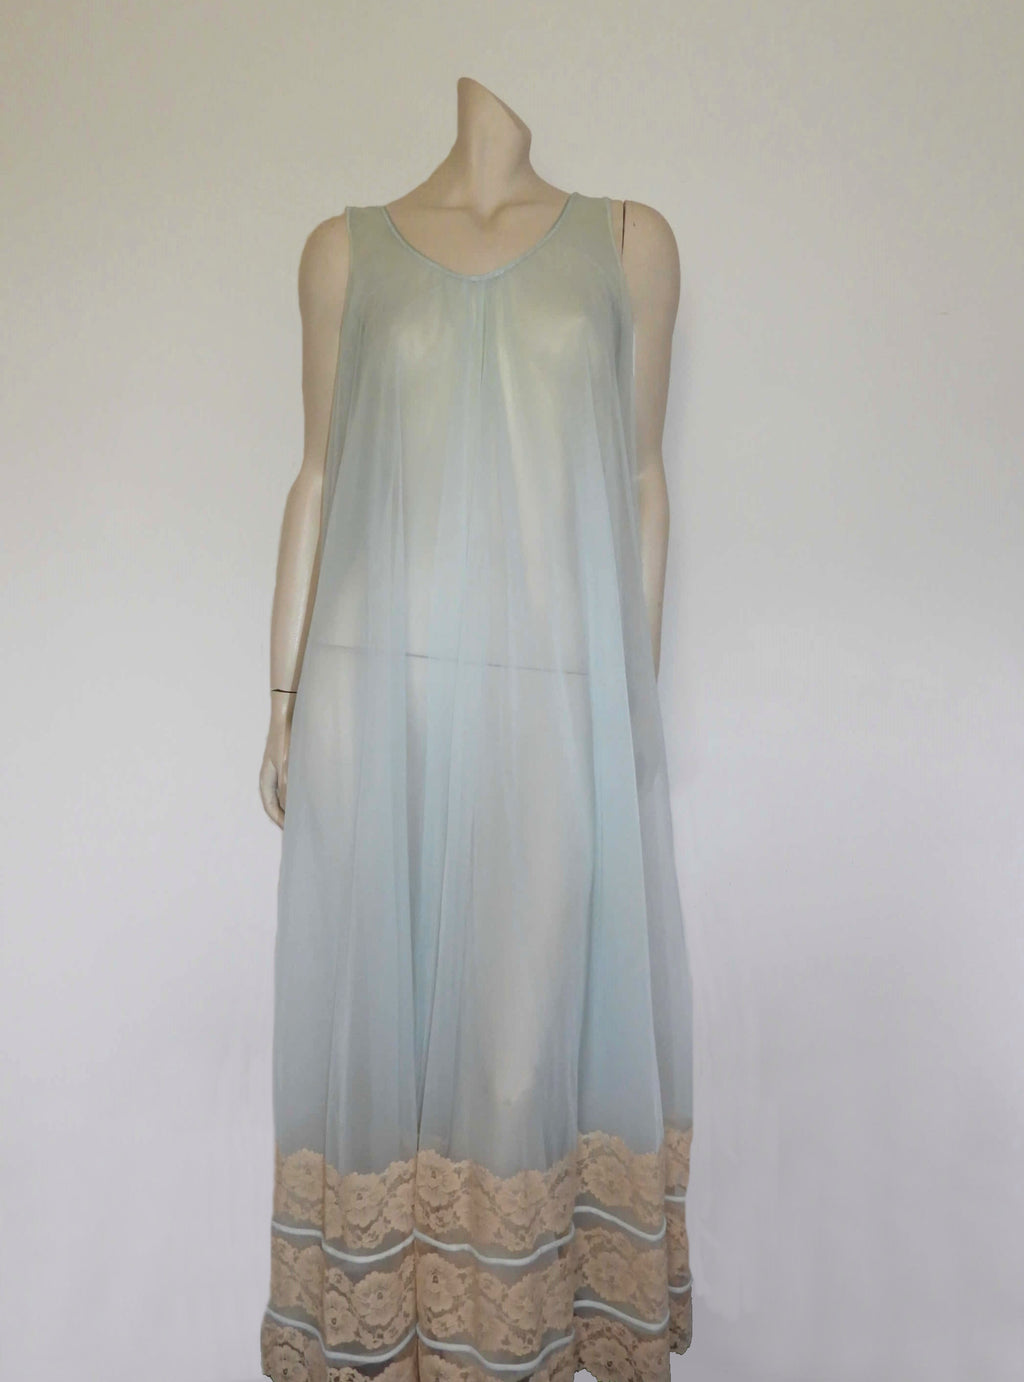 1960s vintage pale blue sheer nightgown with deep lace border by intime